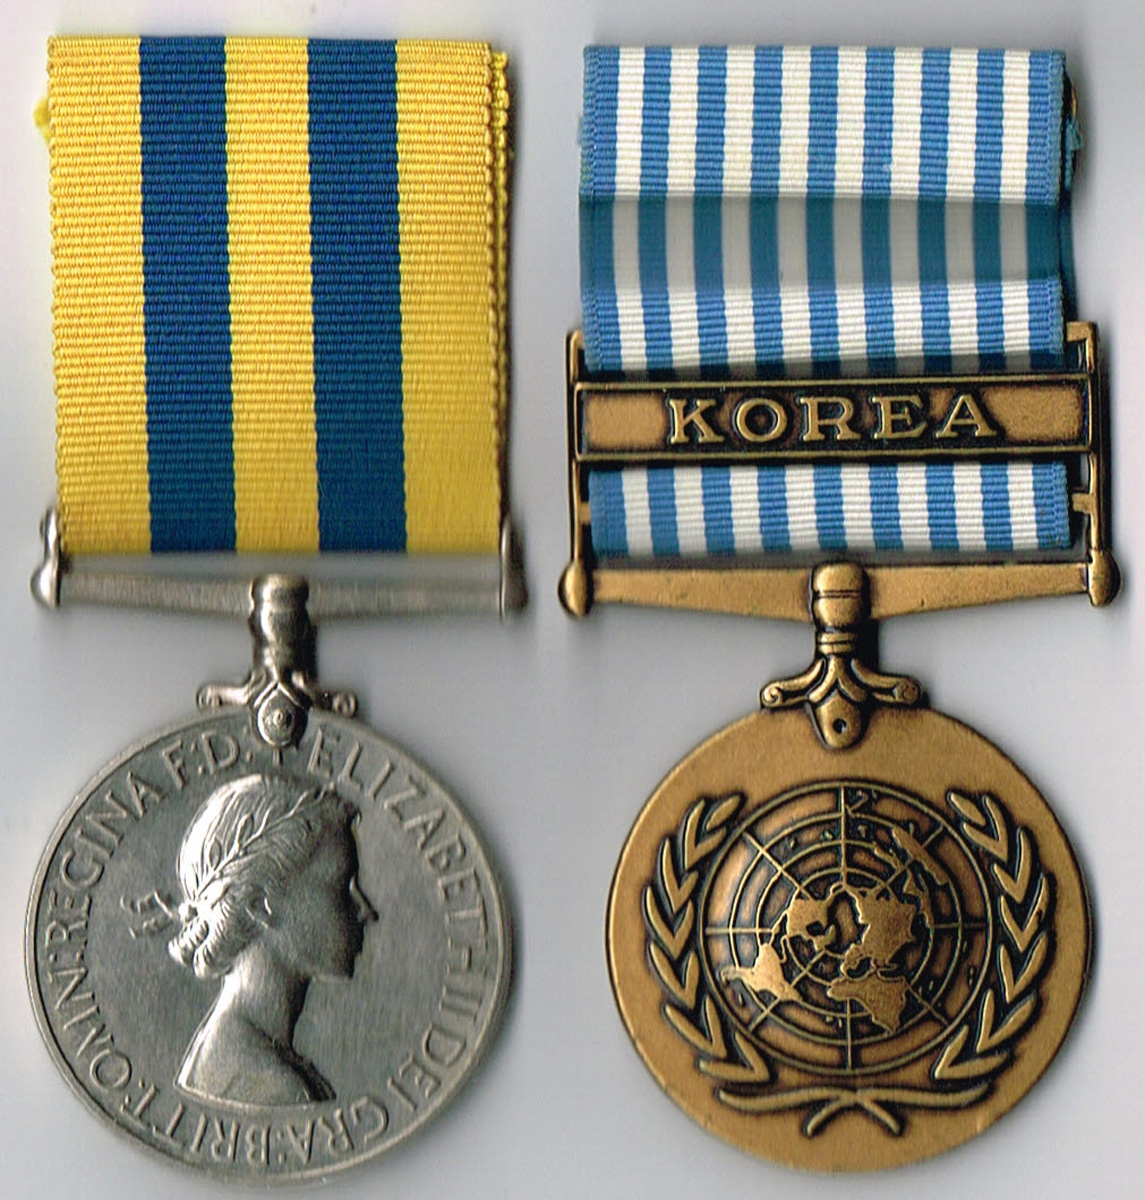 Elizabeth II Korea Medal 1950-1953 and United Nations Korea Medal 1950-1954 to Royal Ulster Rifles/Royal Inniskilling Fusiliers. at Whyte's Auctions